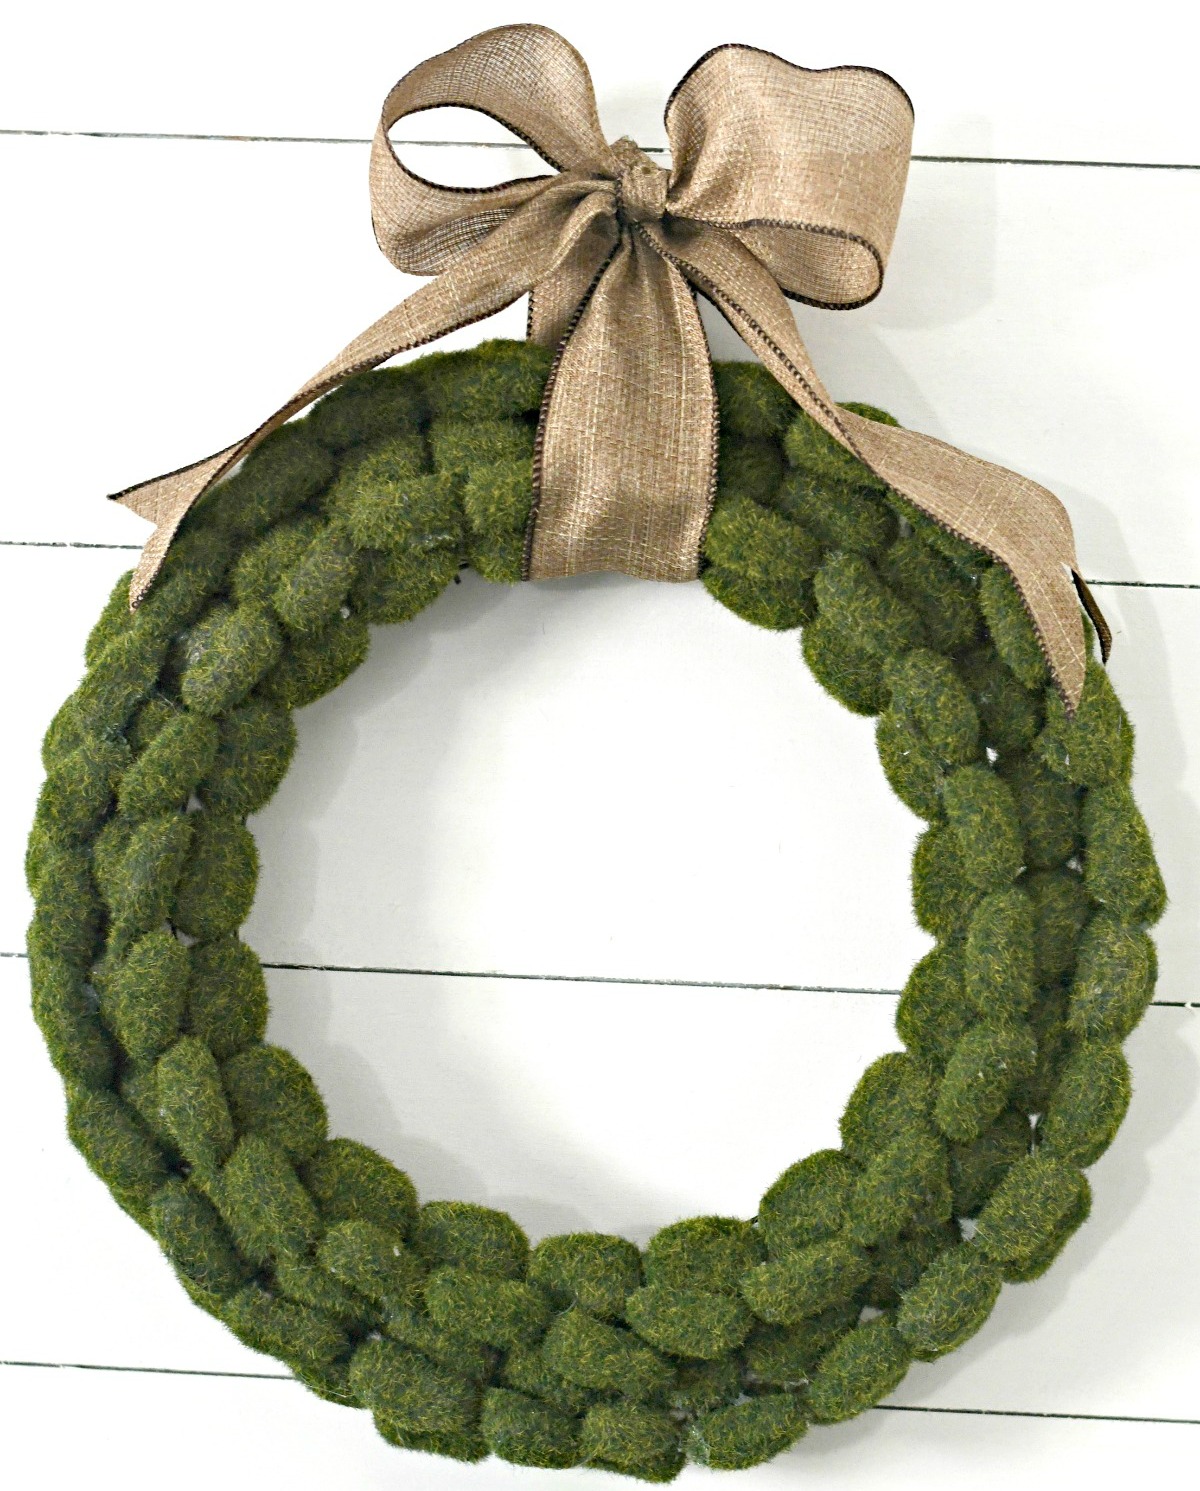 finished and hung up dollar tree moss rock wreath